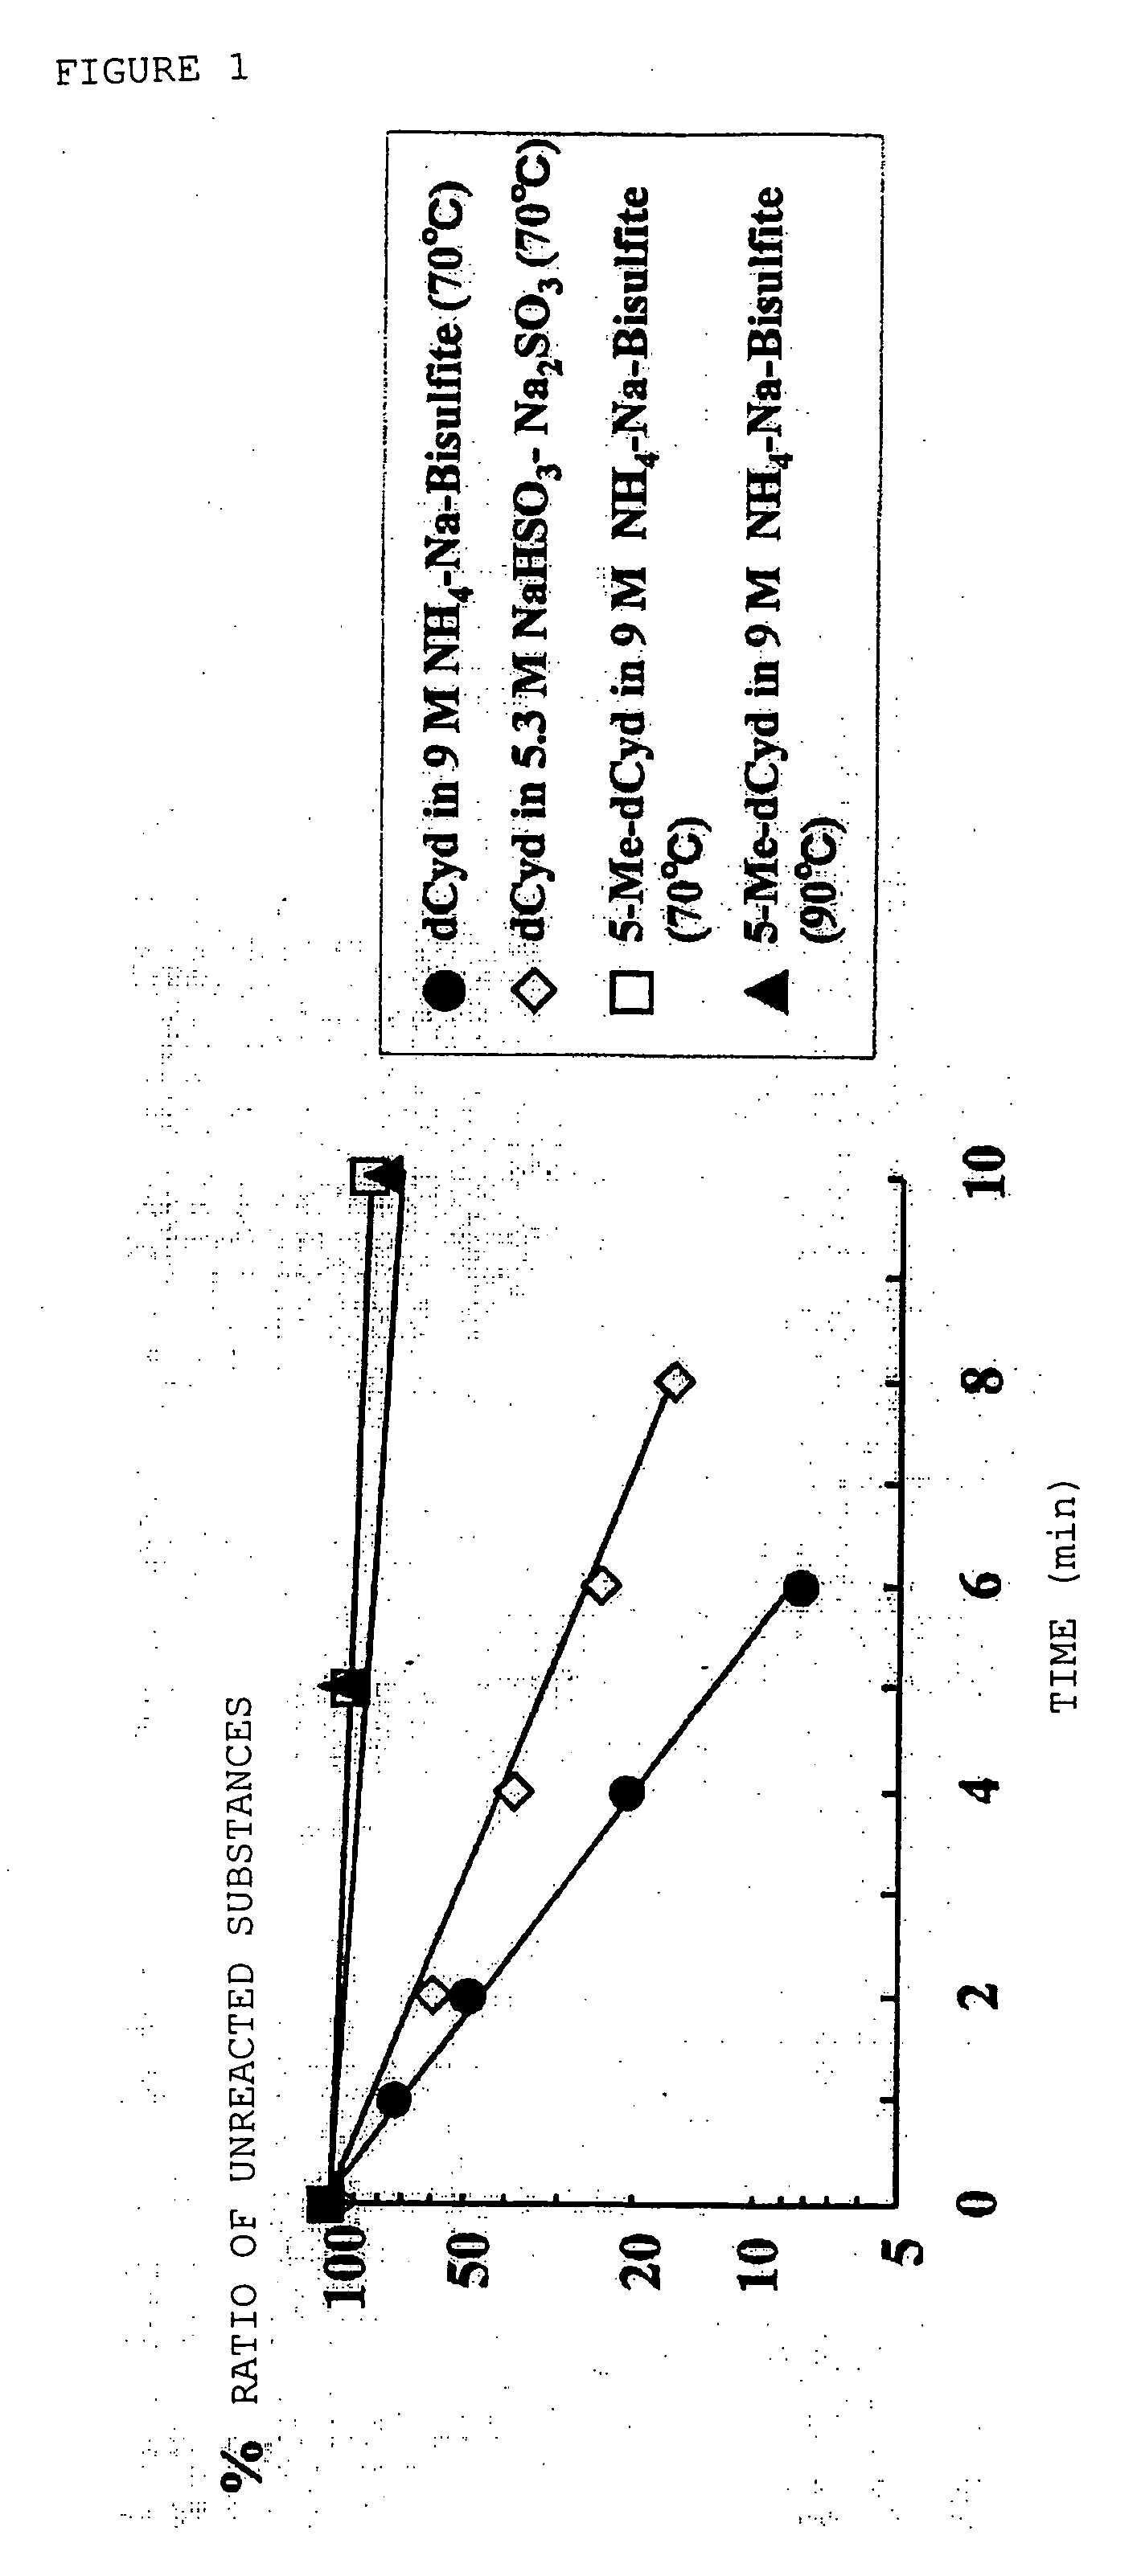 Composition for deaminating dna and method of detecting methylated dna